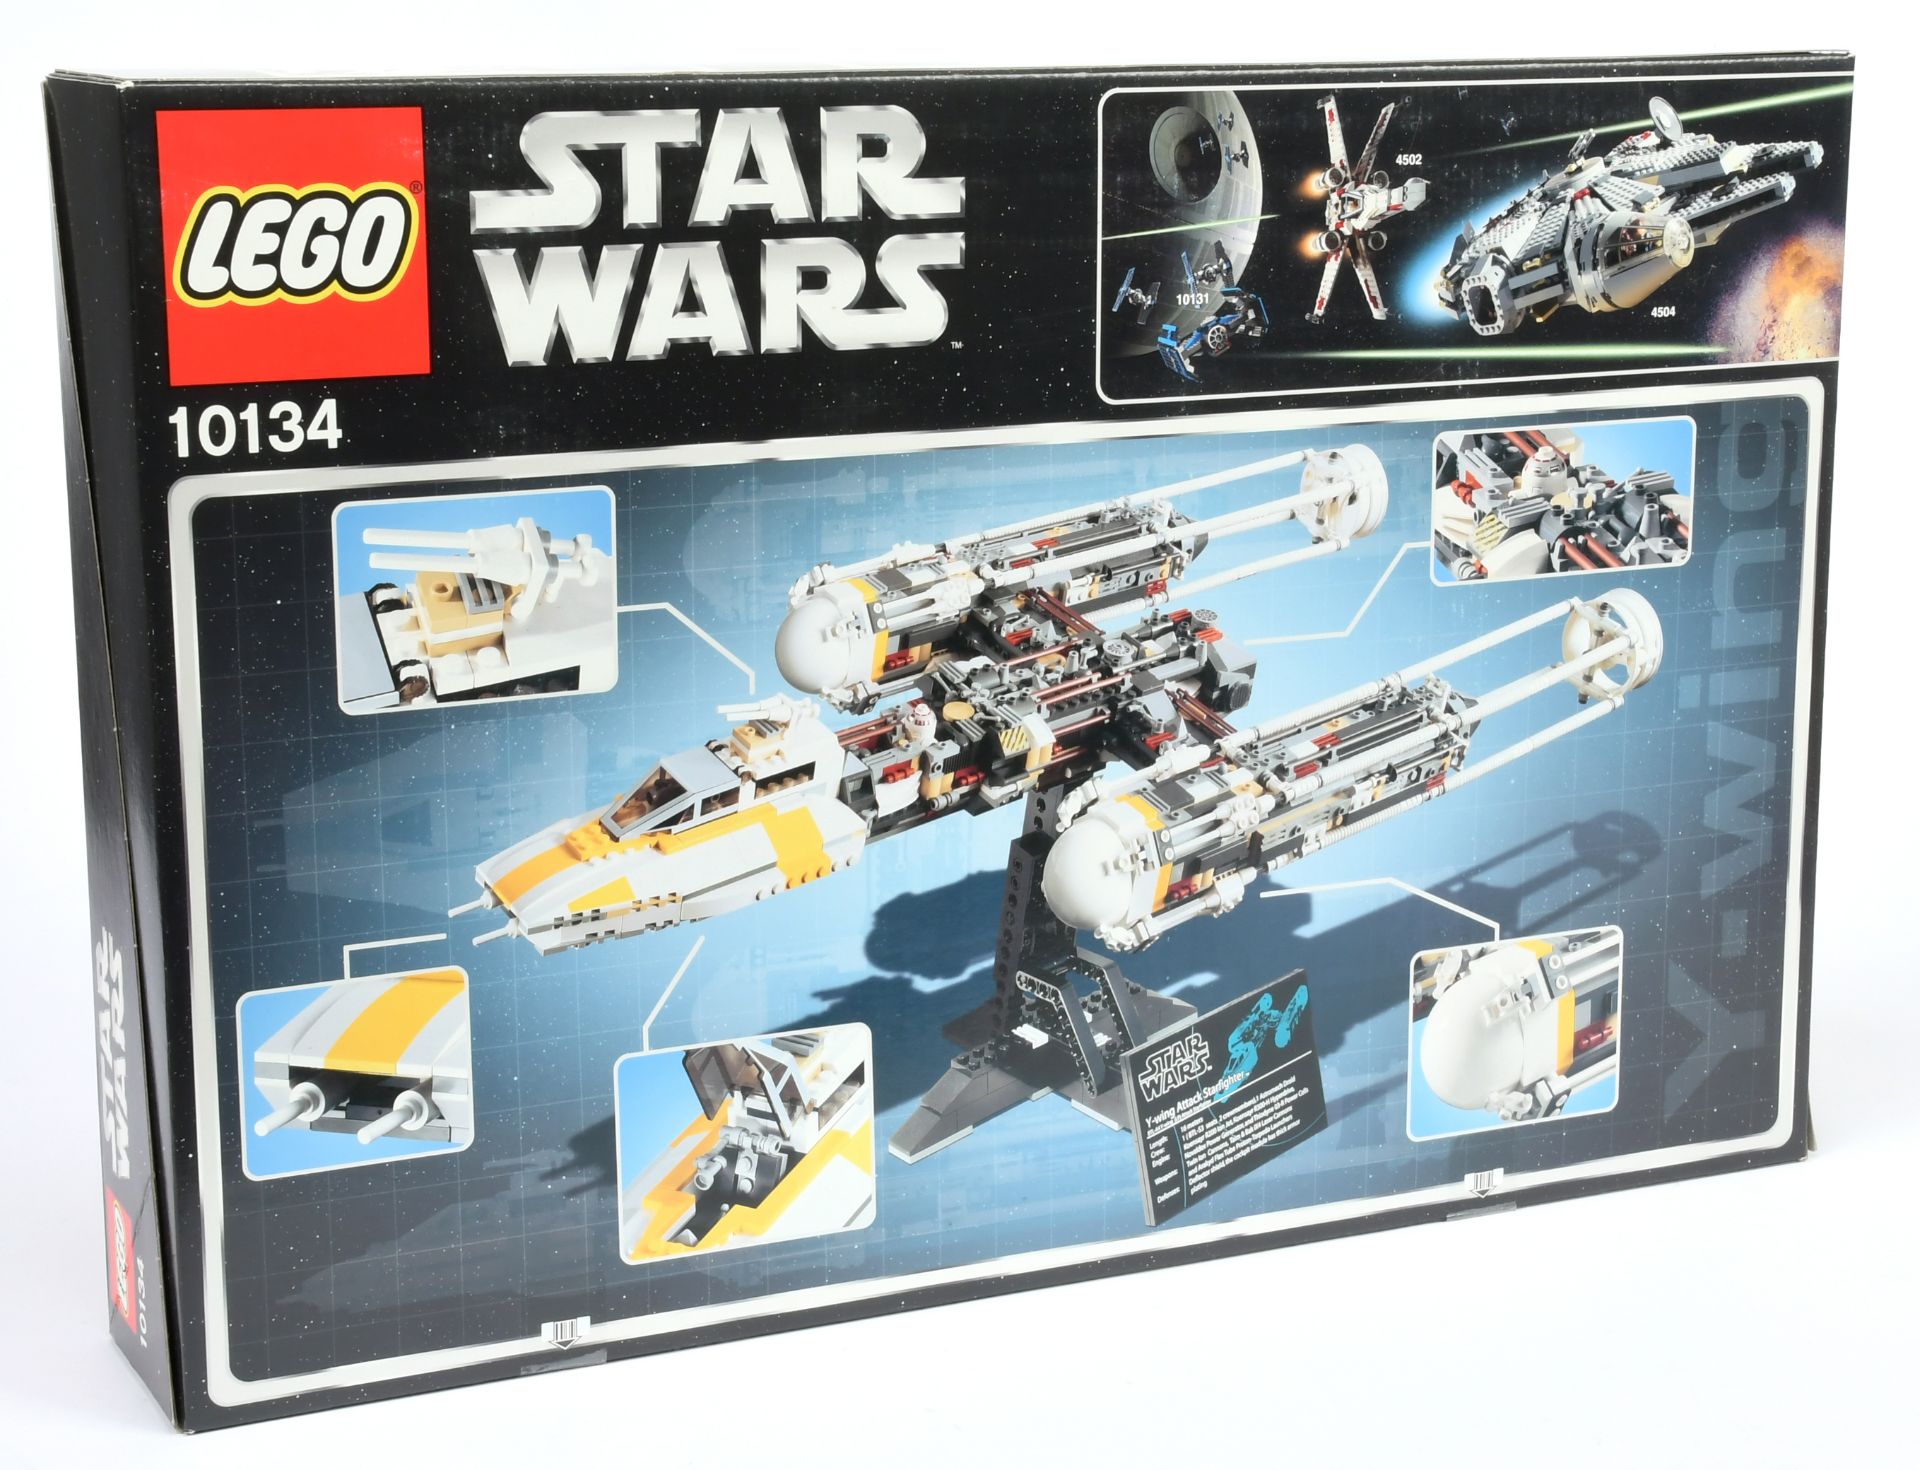 Lego Star Wars 10134 Y-Wing Attack Starfighter - Star Wars Original Trilogy Edition - 2004 Issue,... - Image 2 of 2